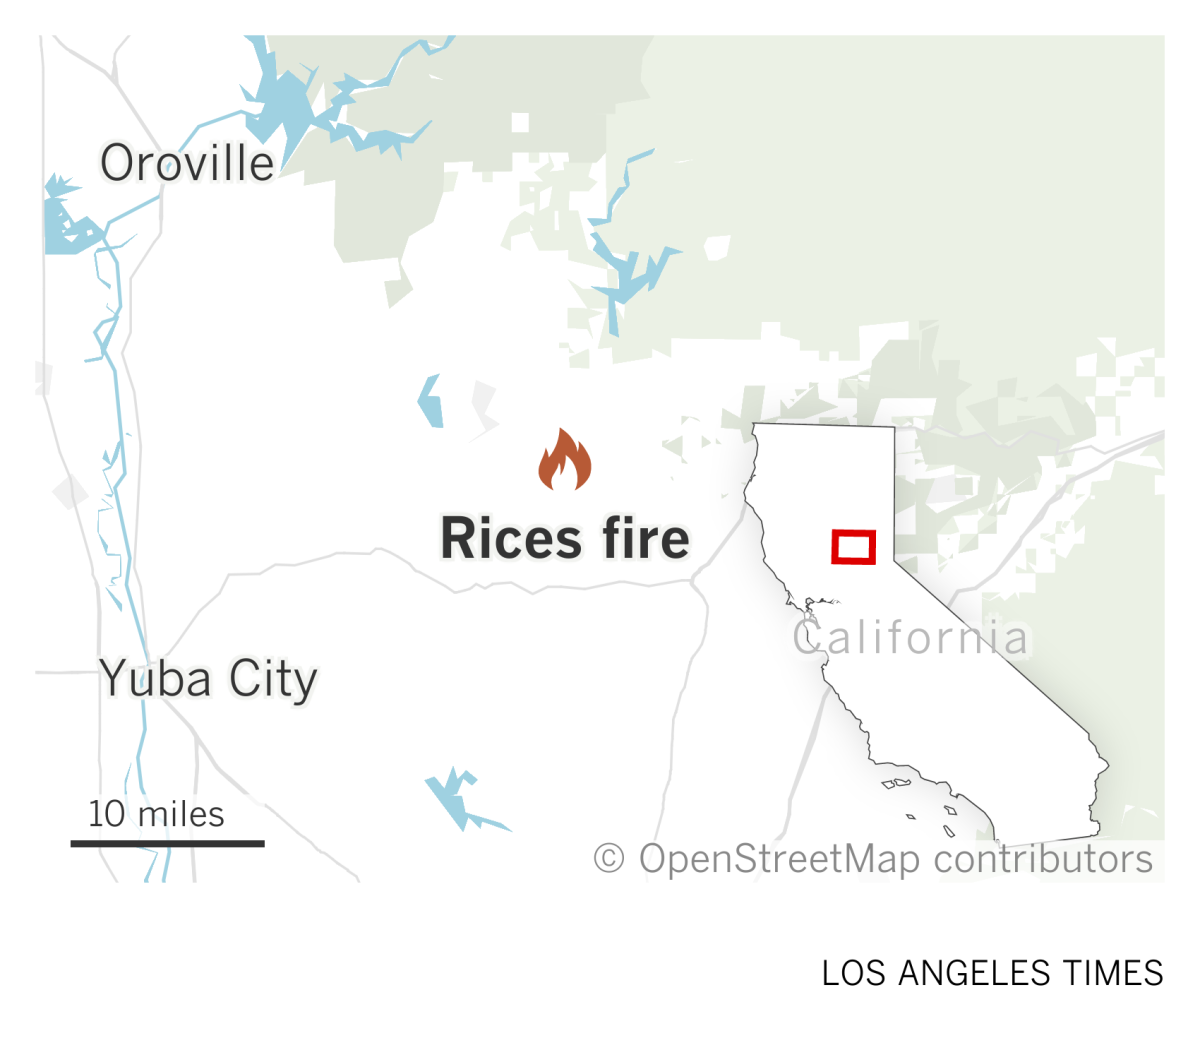 A map of part of Northern California shows the location of the Rice fire southeast of Oroville and northeast of Yuba City